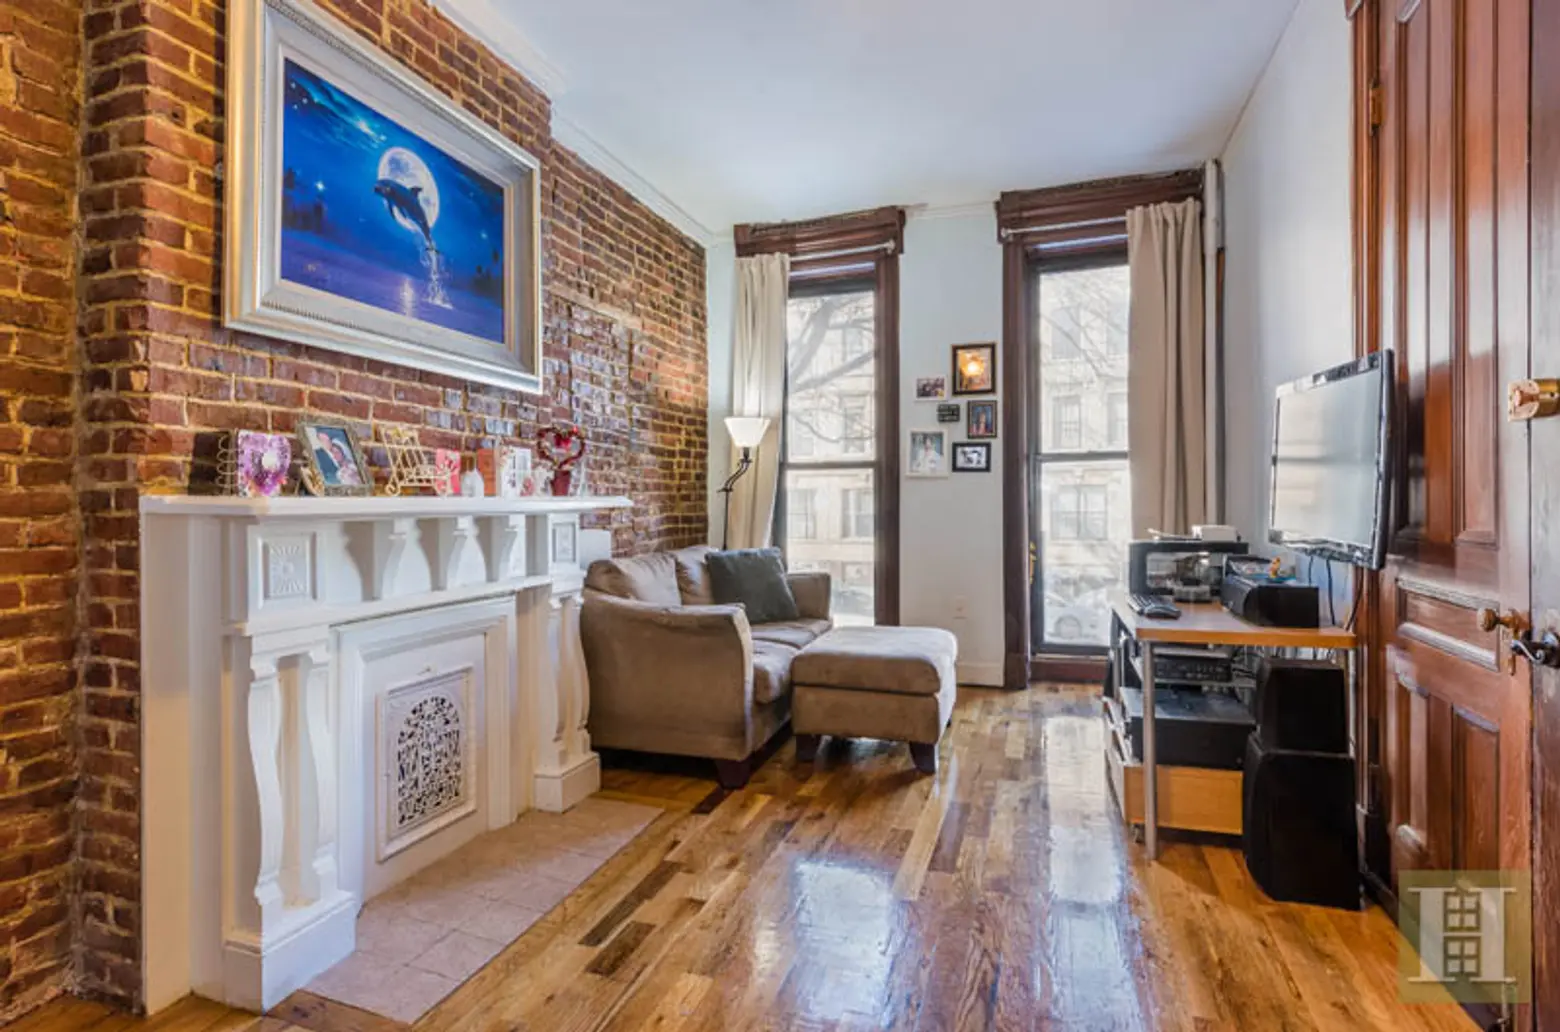 All the Details Are Intact at This $1.5M Historic Bed-Stuy Brownstone